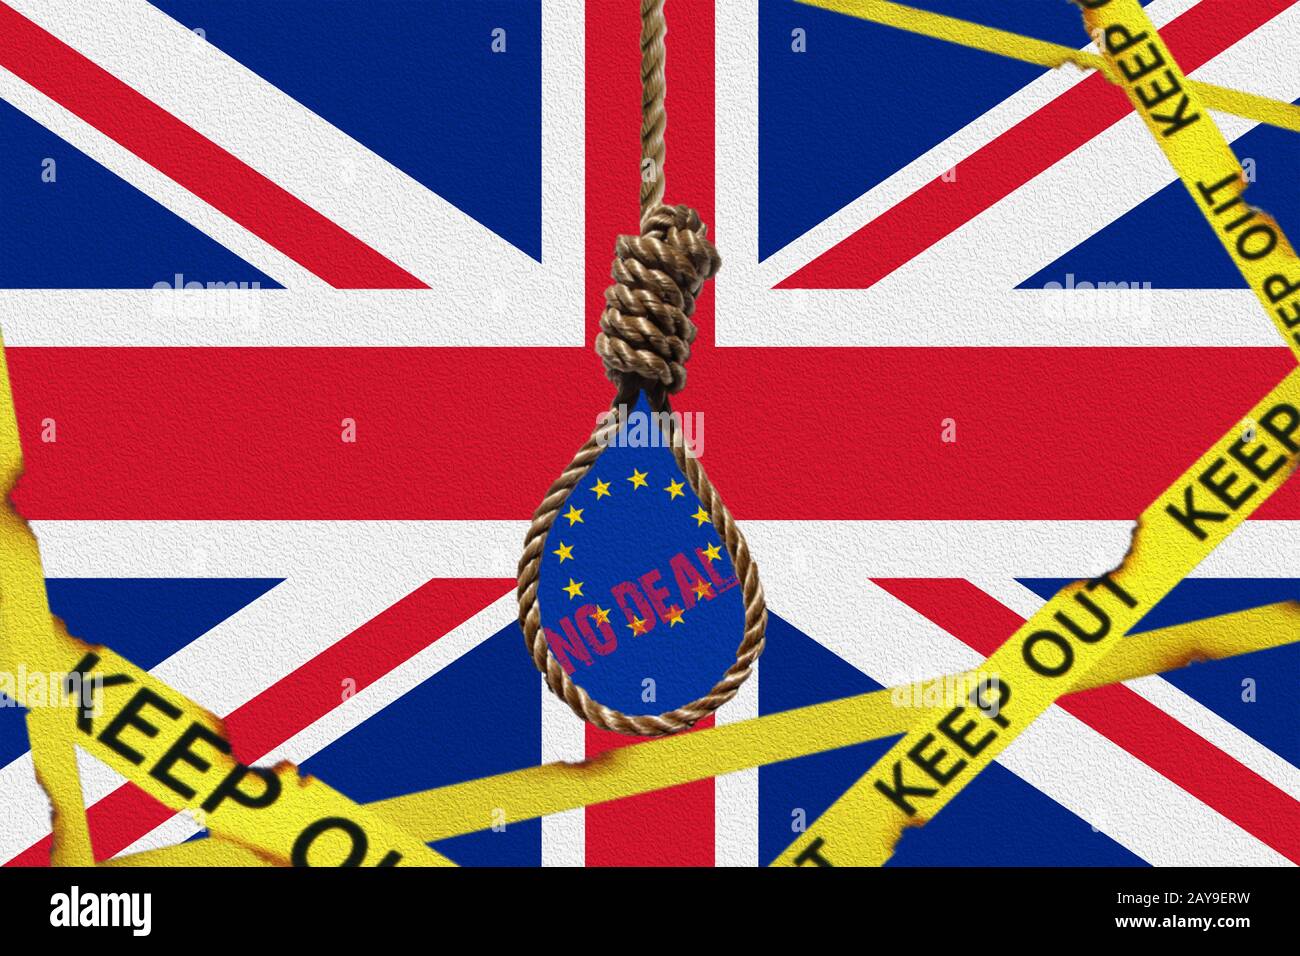 Brexit No Deal, Flags of the United Kingdom and the European Union, Illustration Stock Photo